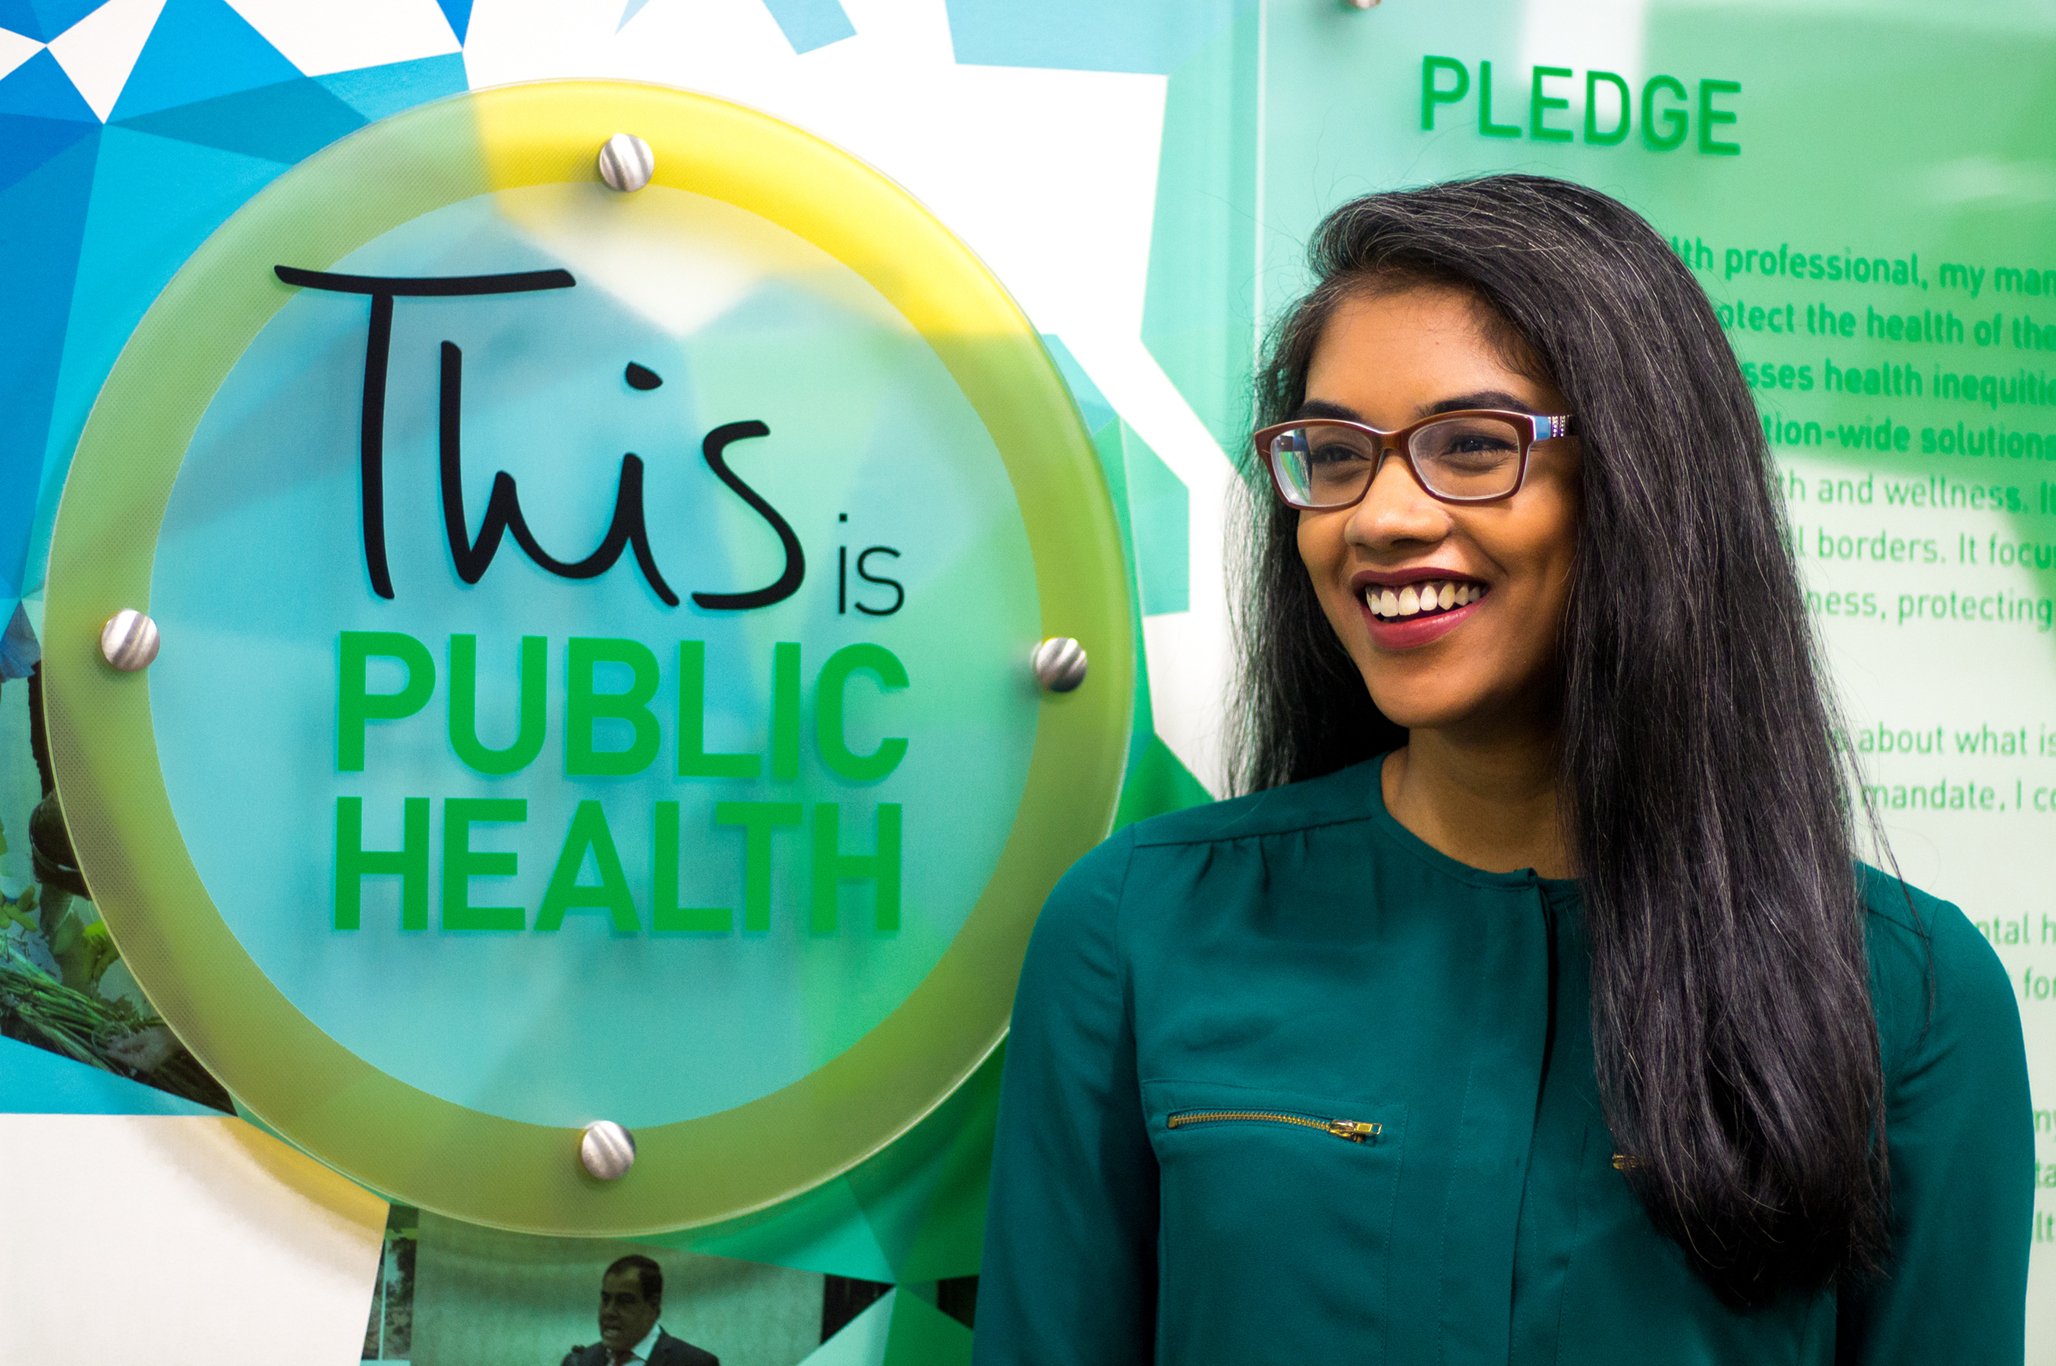 Tharsini posing in front of the This is Public Health display